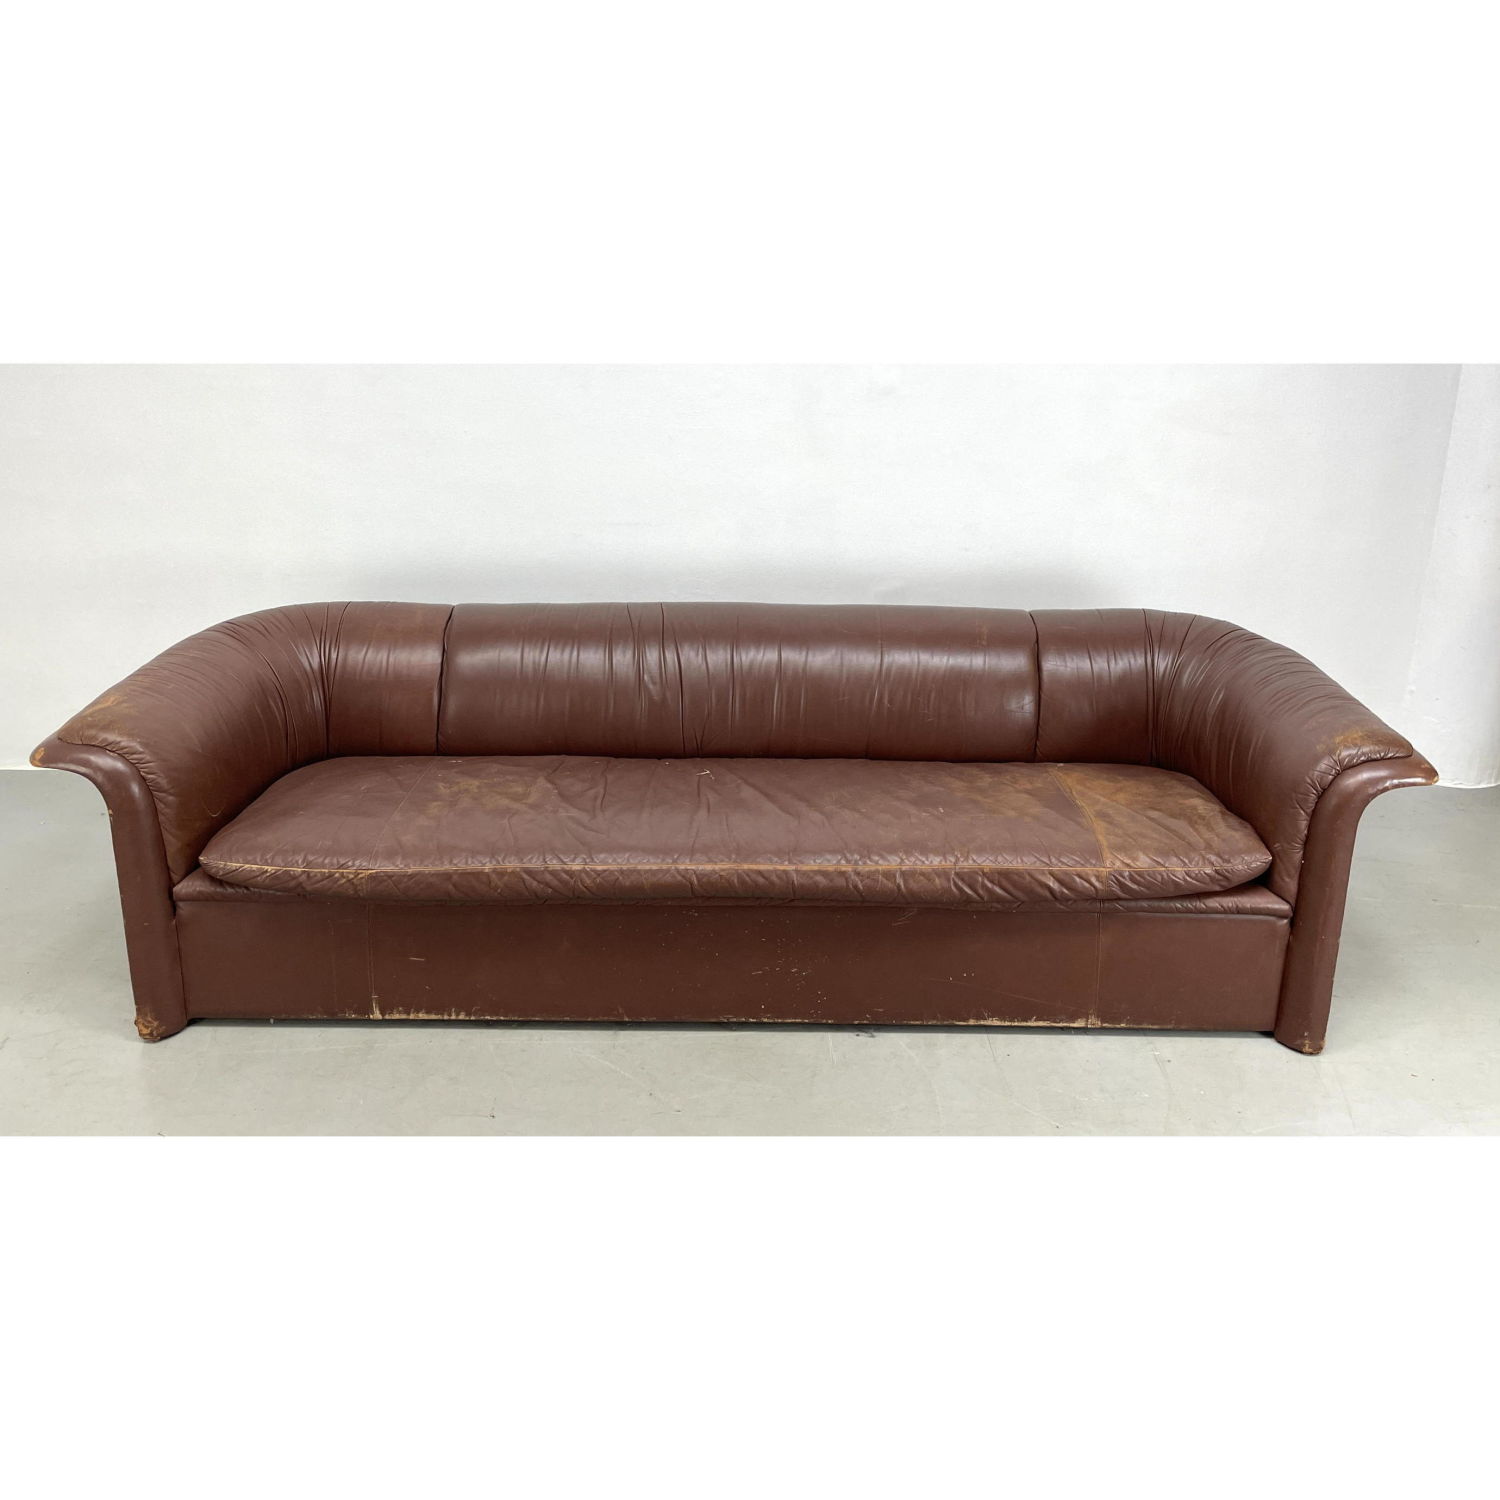 DUNBAR Brown Leather Couch Sofa  2b9660